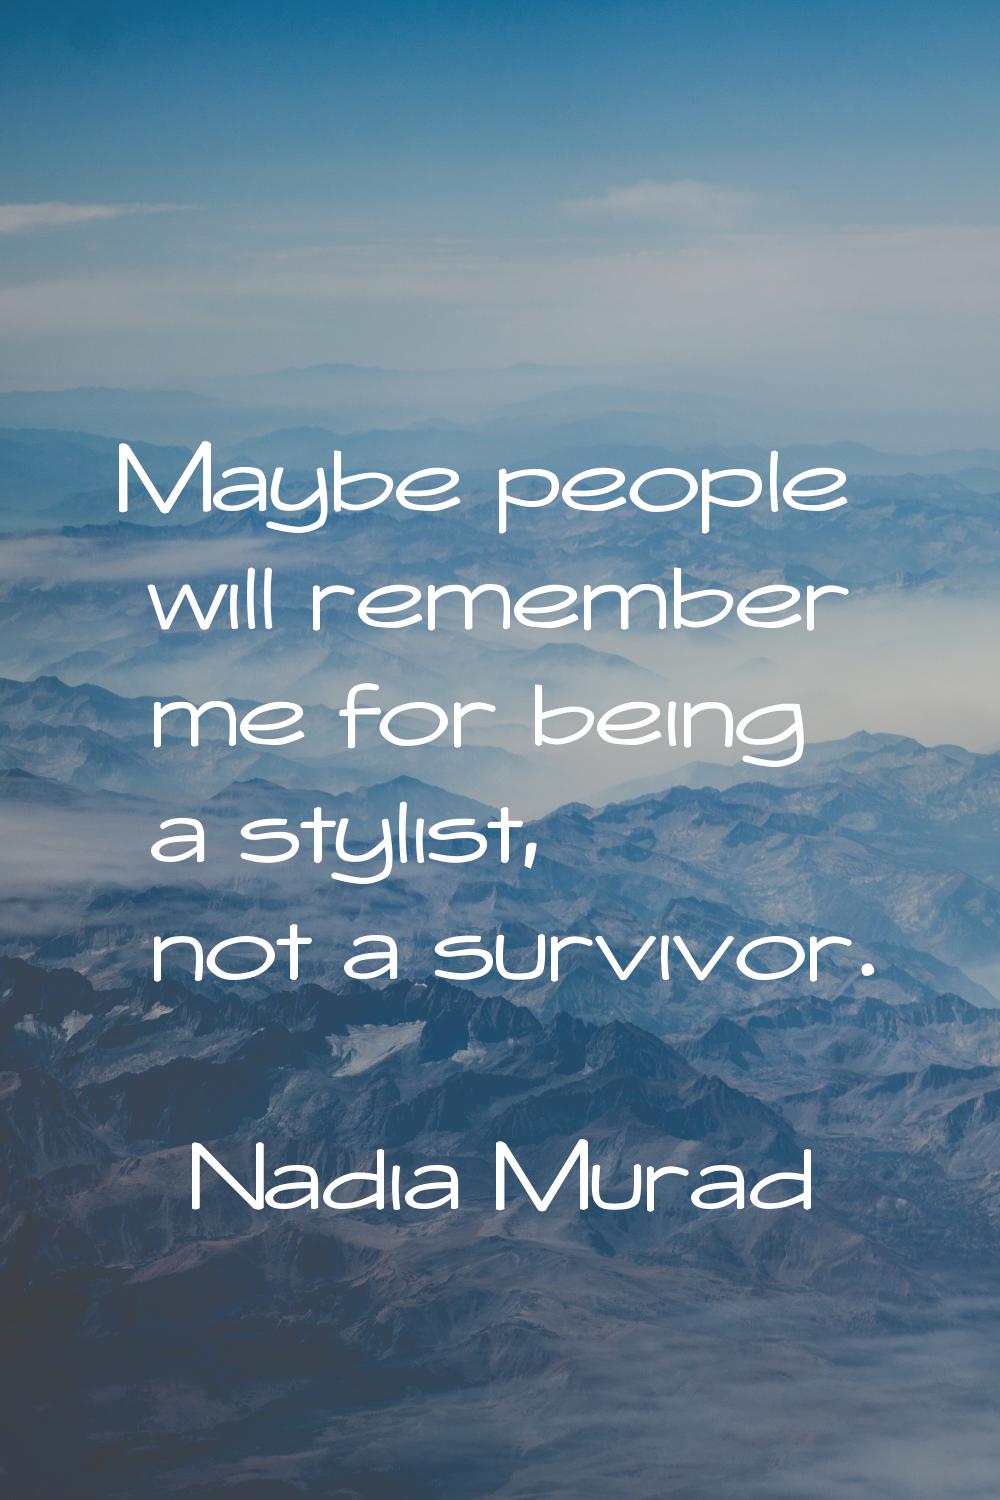 Maybe people will remember me for being a stylist, not a survivor.